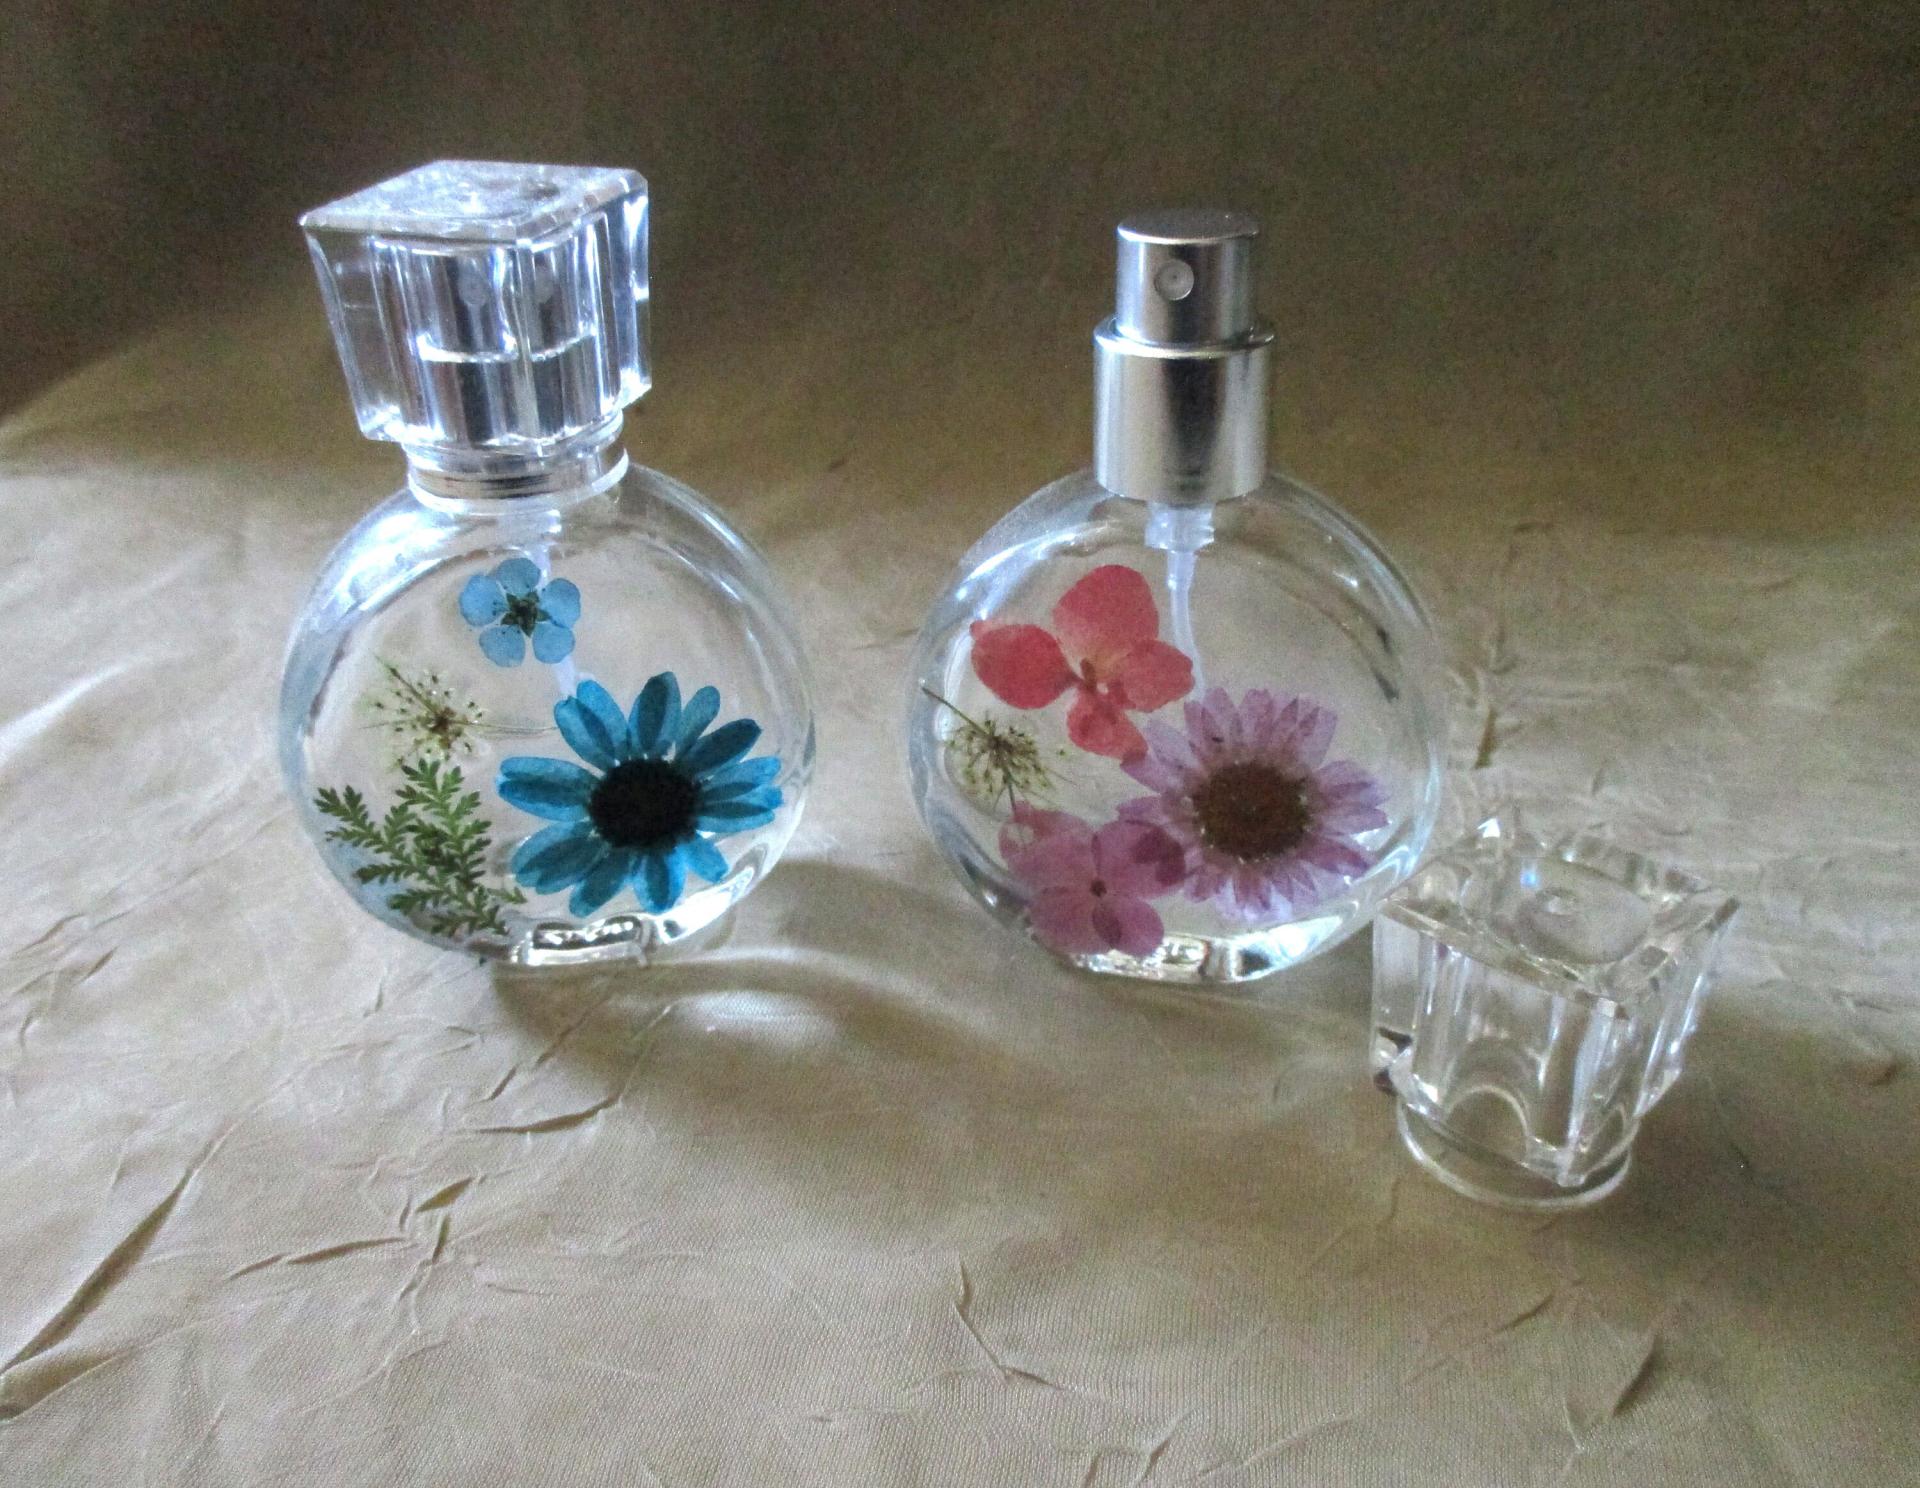 Floral Perfume Bottles, 1 ounce Small Spray Mister, Round Bottles, Flowers in Resin